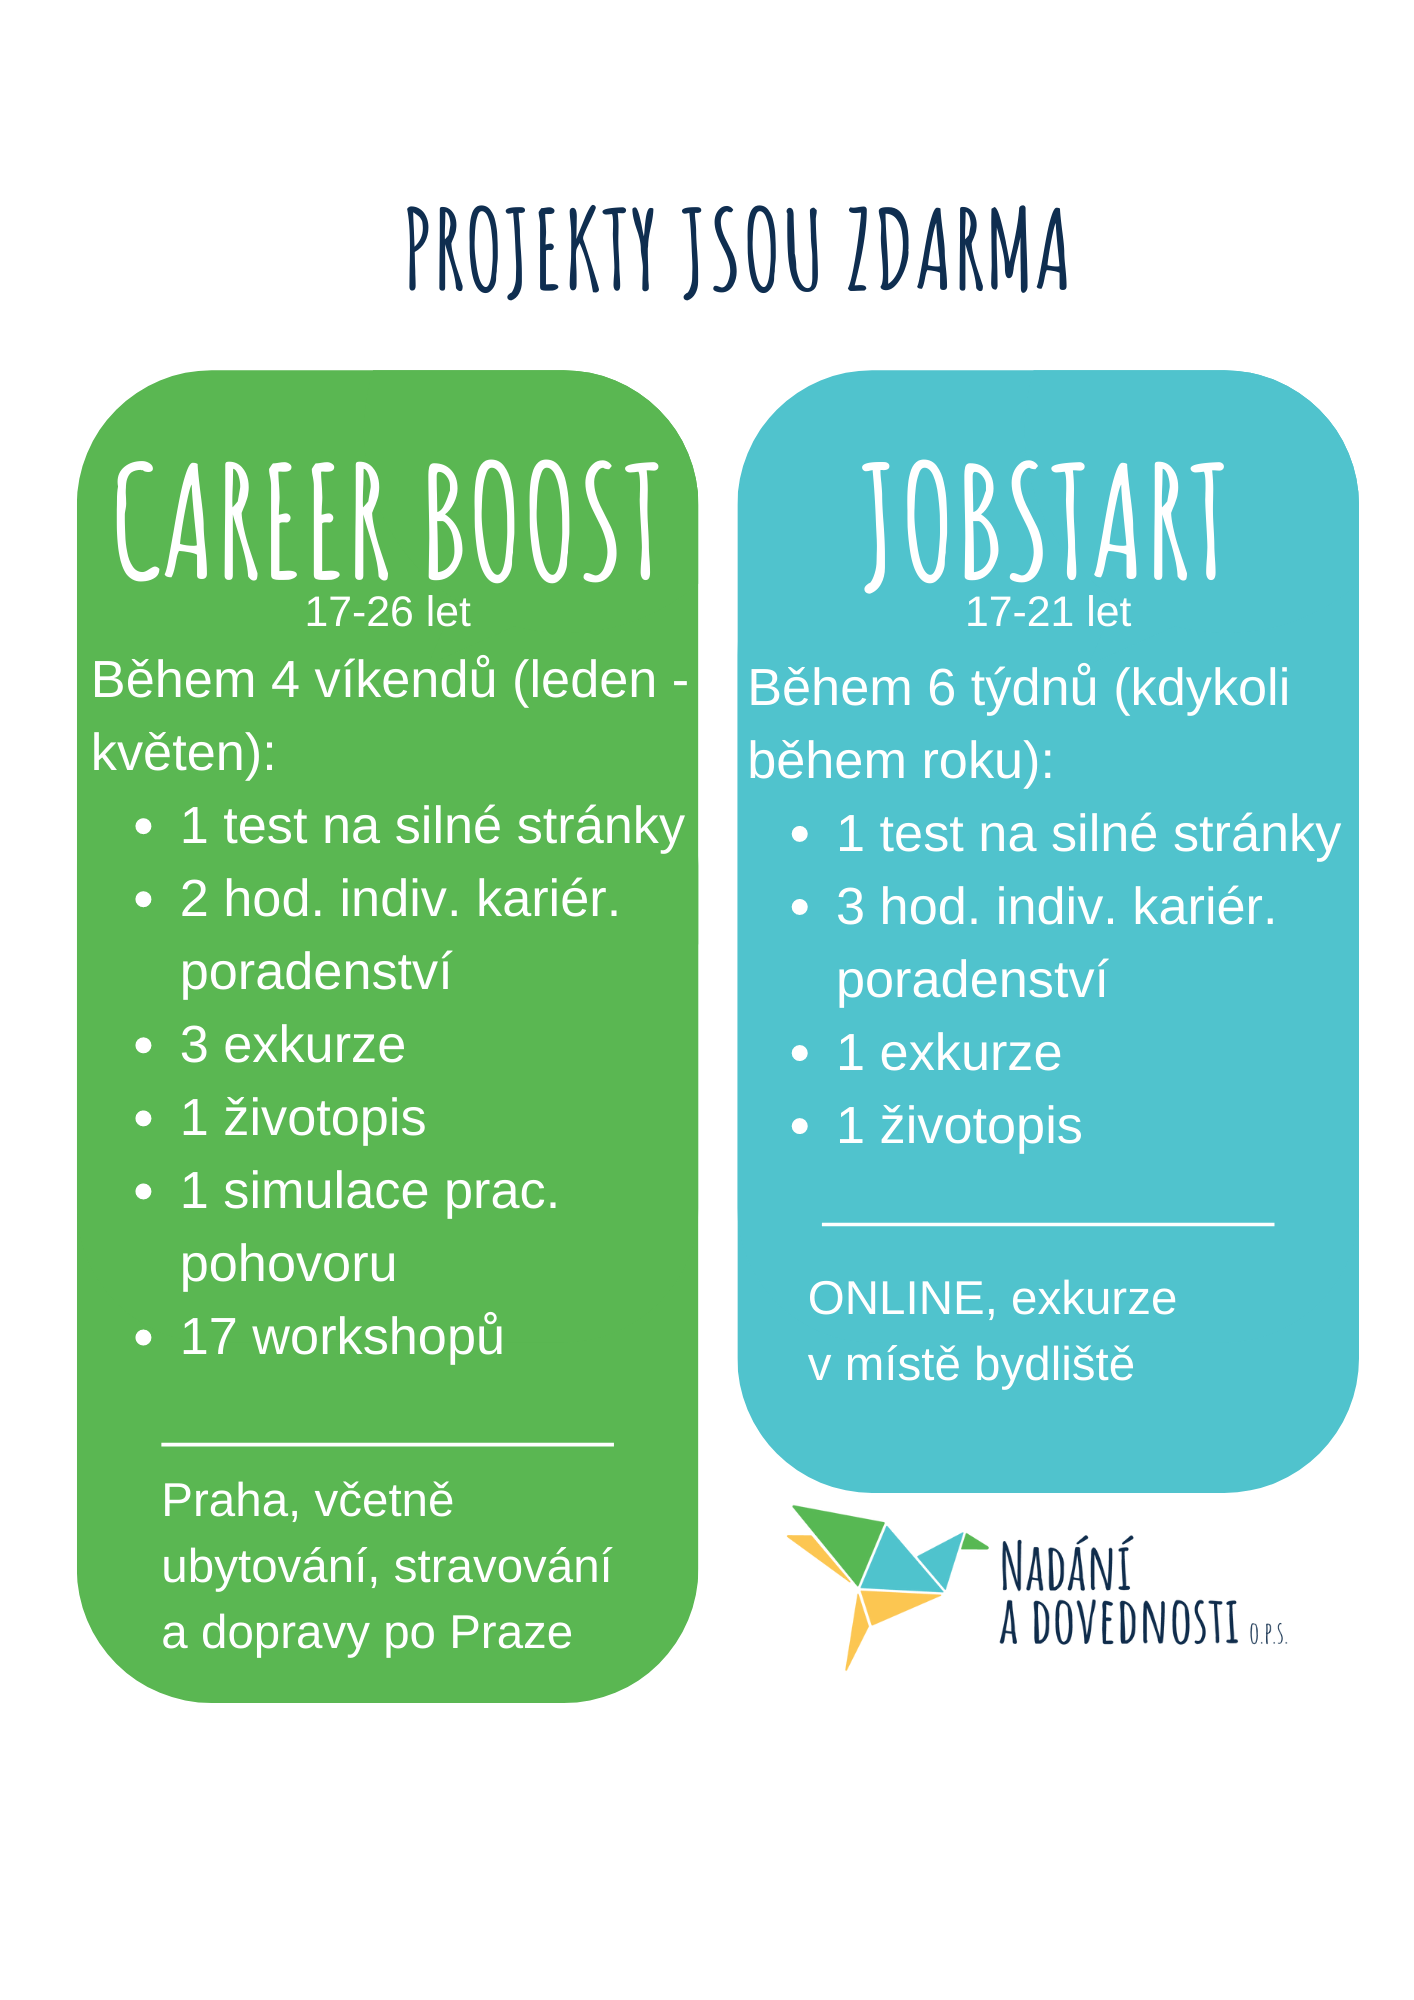 Career boost and Job start